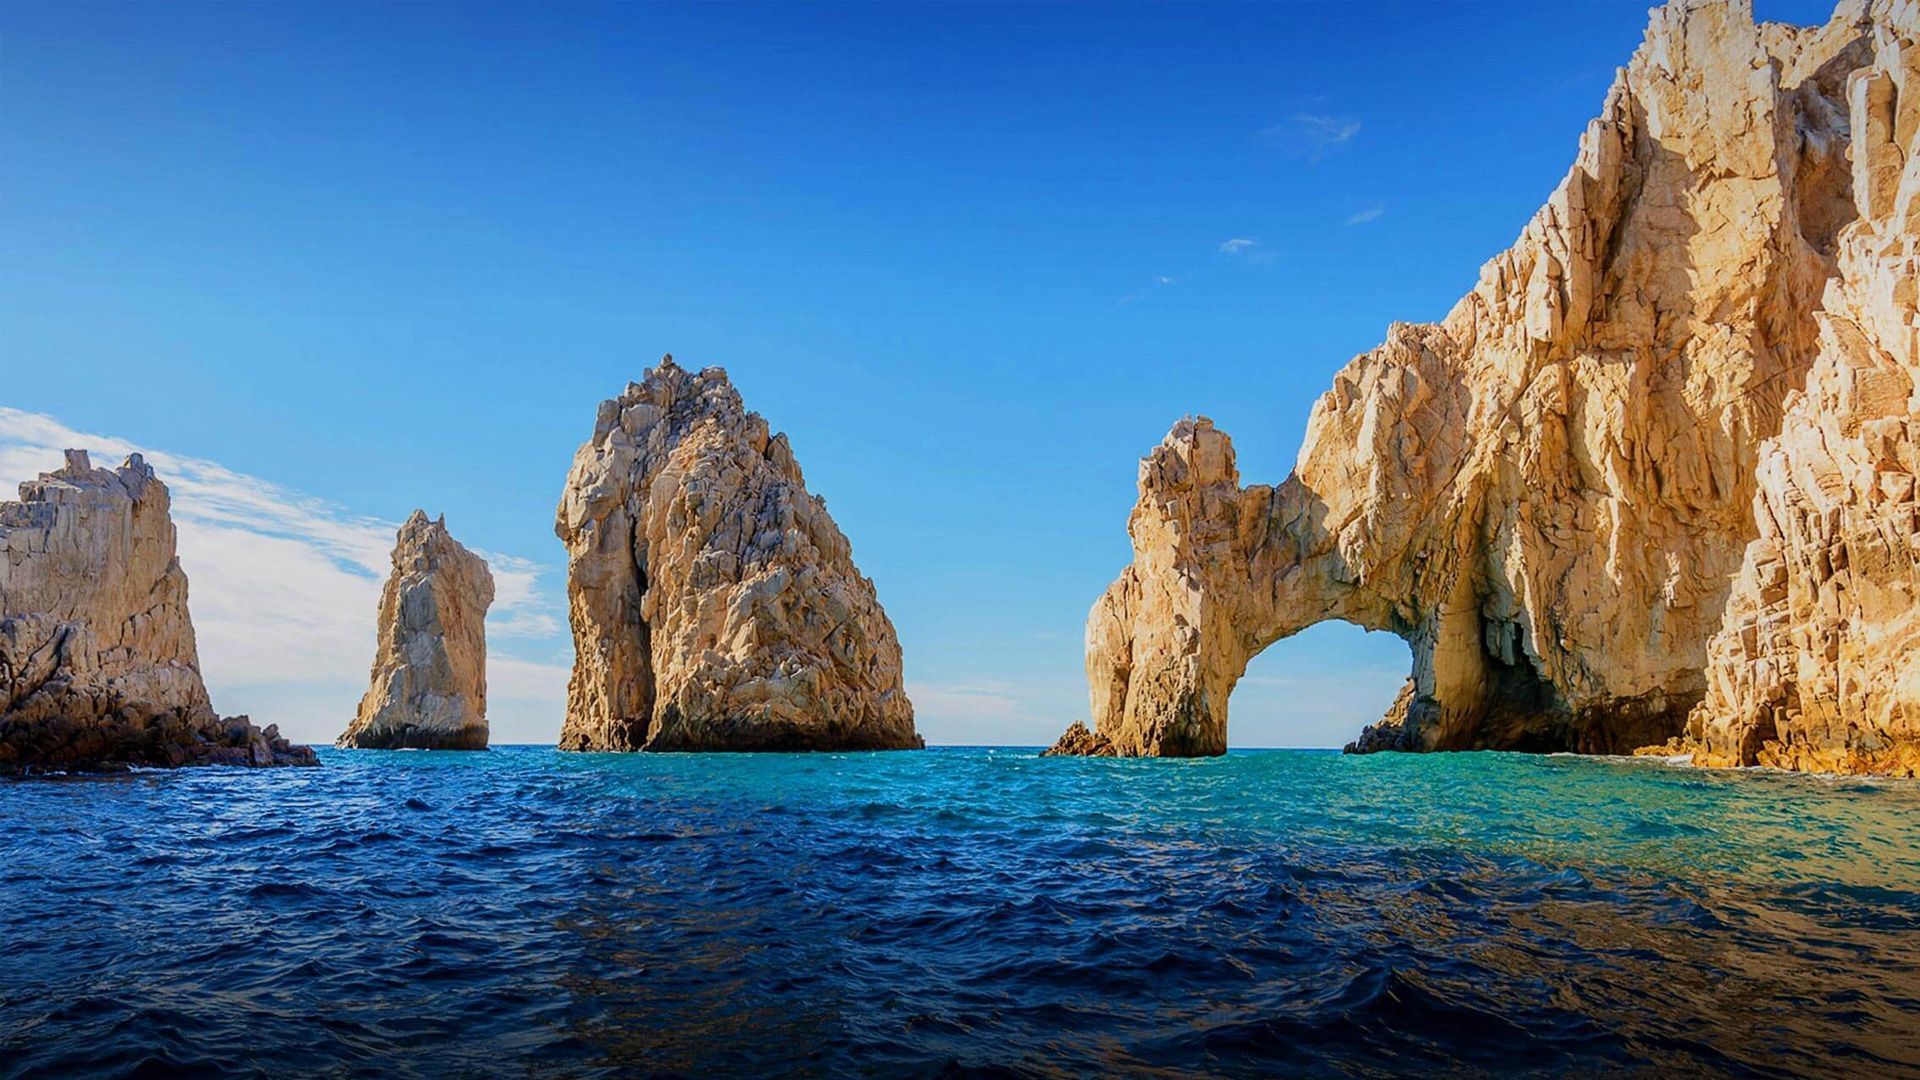 The Arch of Cabo San Lucas near Fiesta Americana Travelty